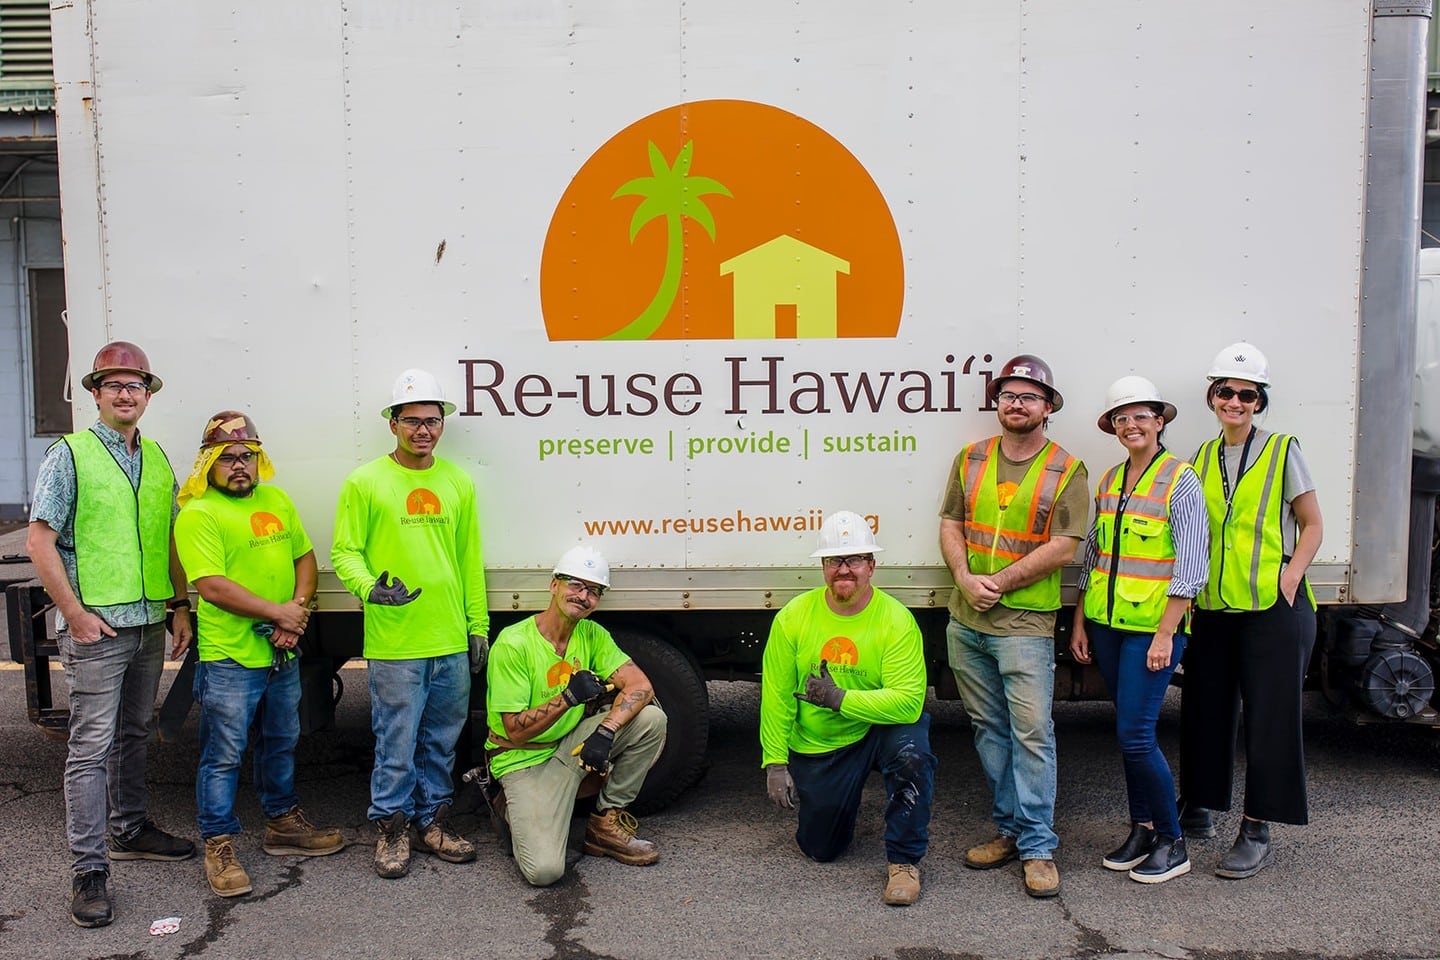 We are proud to partner with our Kakaʻako neighbor, @reusehawaii! By salvaging and recovering construction materials and furniture for resale and reuse, the non-profit is helping our community become more resilient and sustainable.